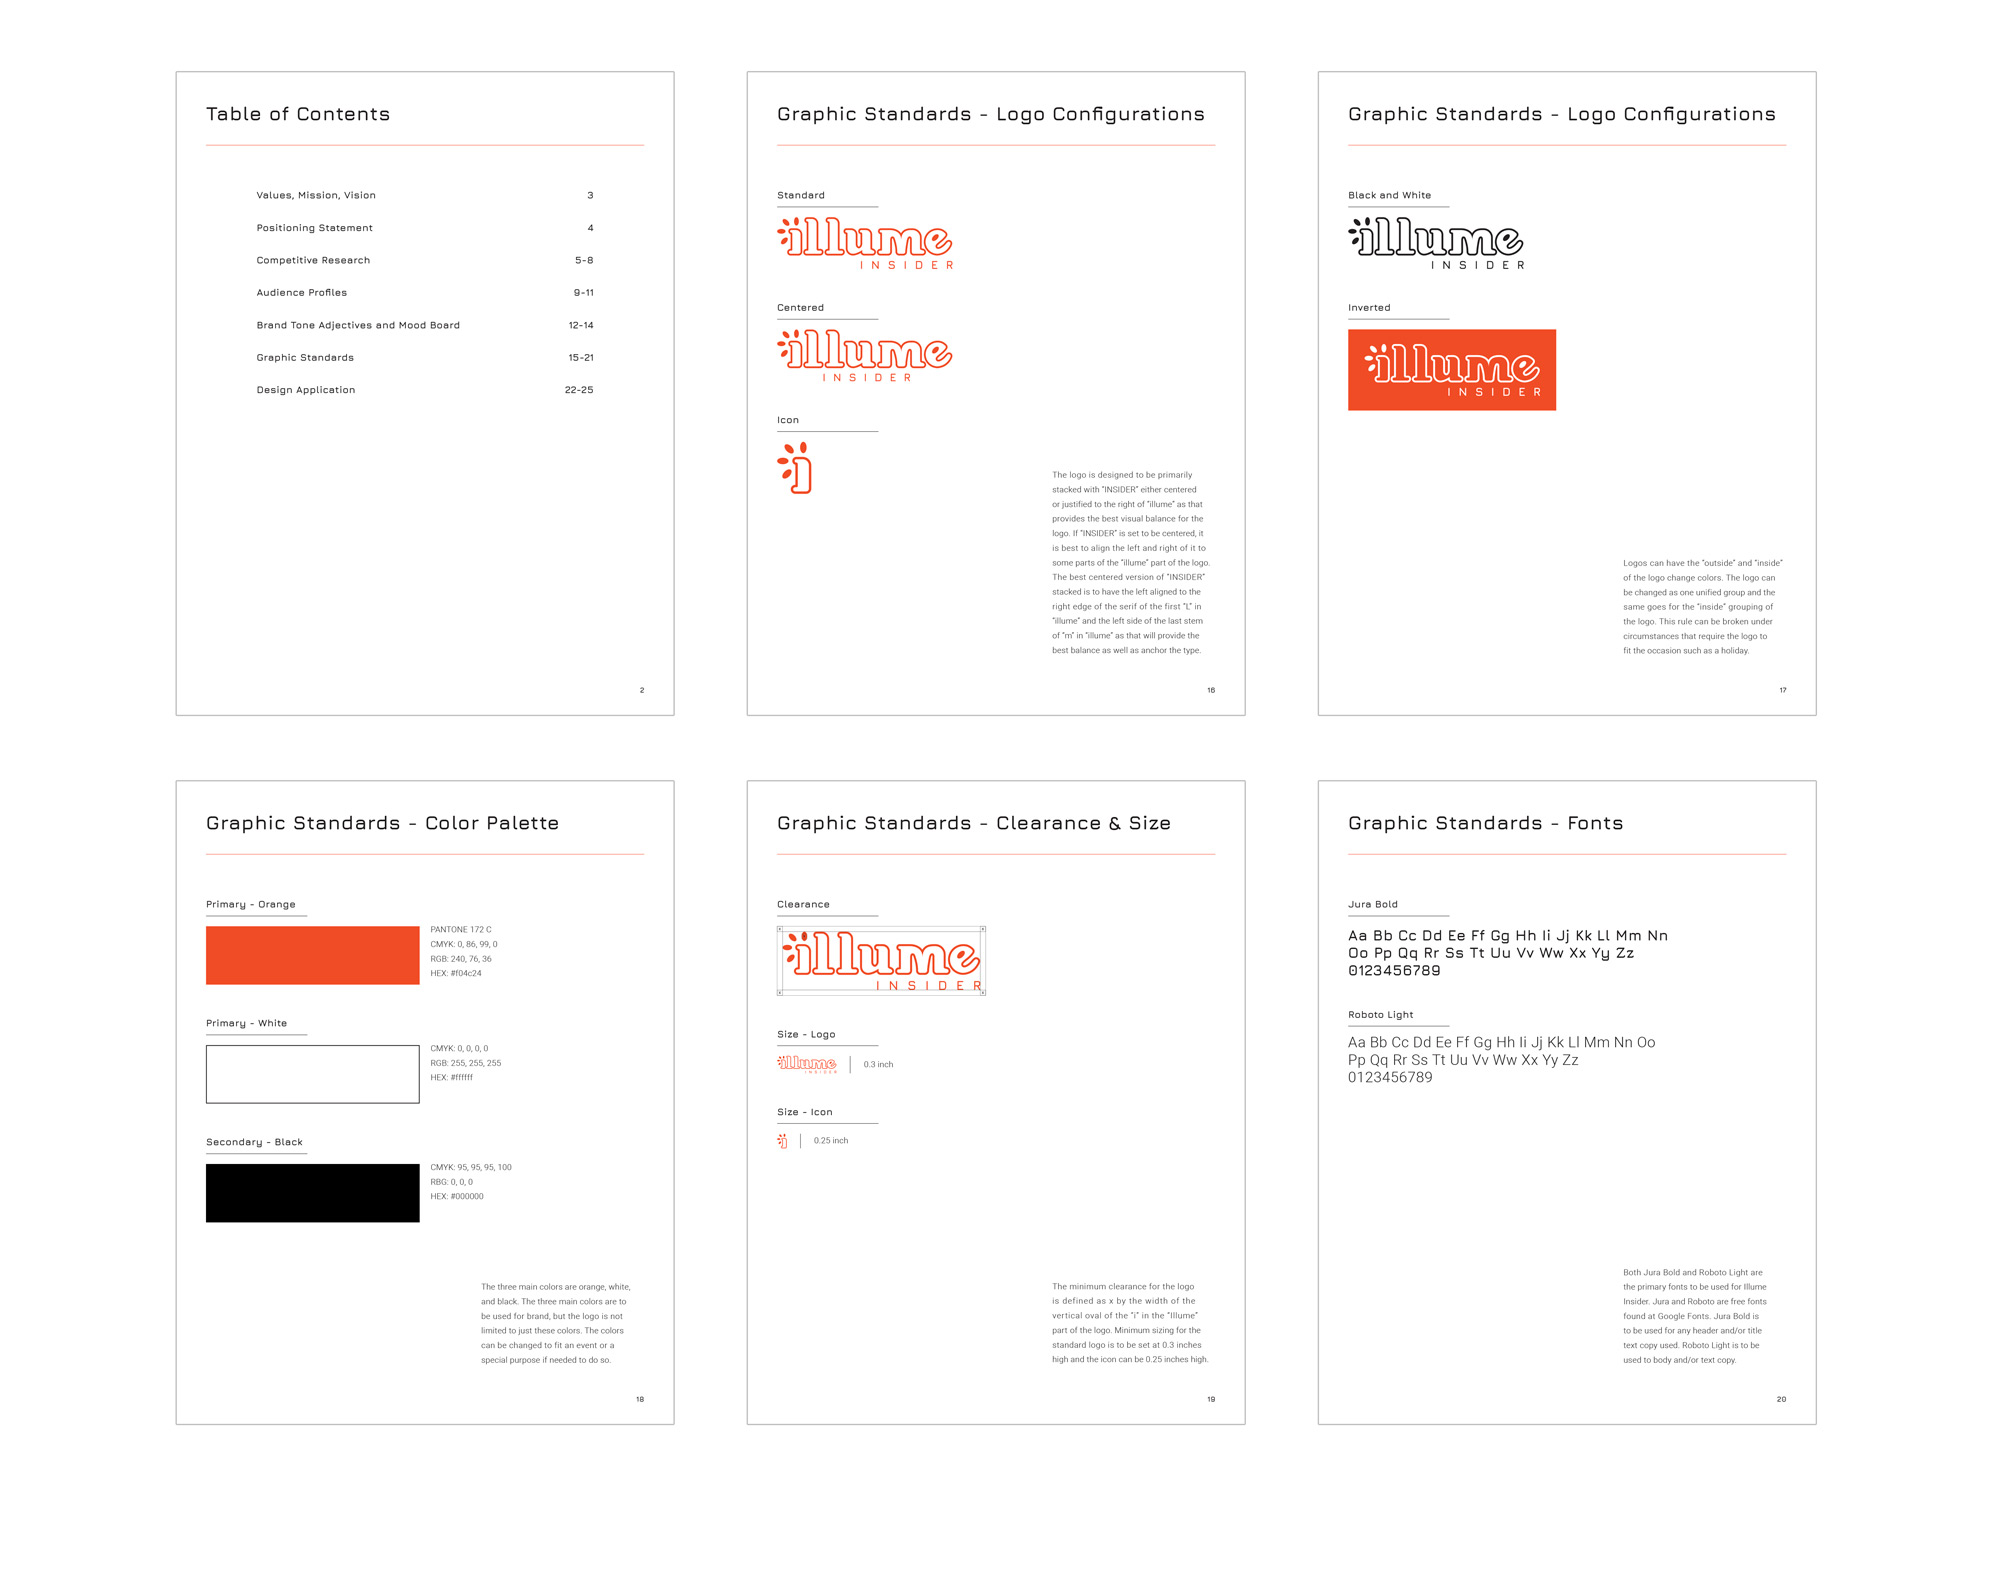 Showing pages from the Illume Insider brand deck.